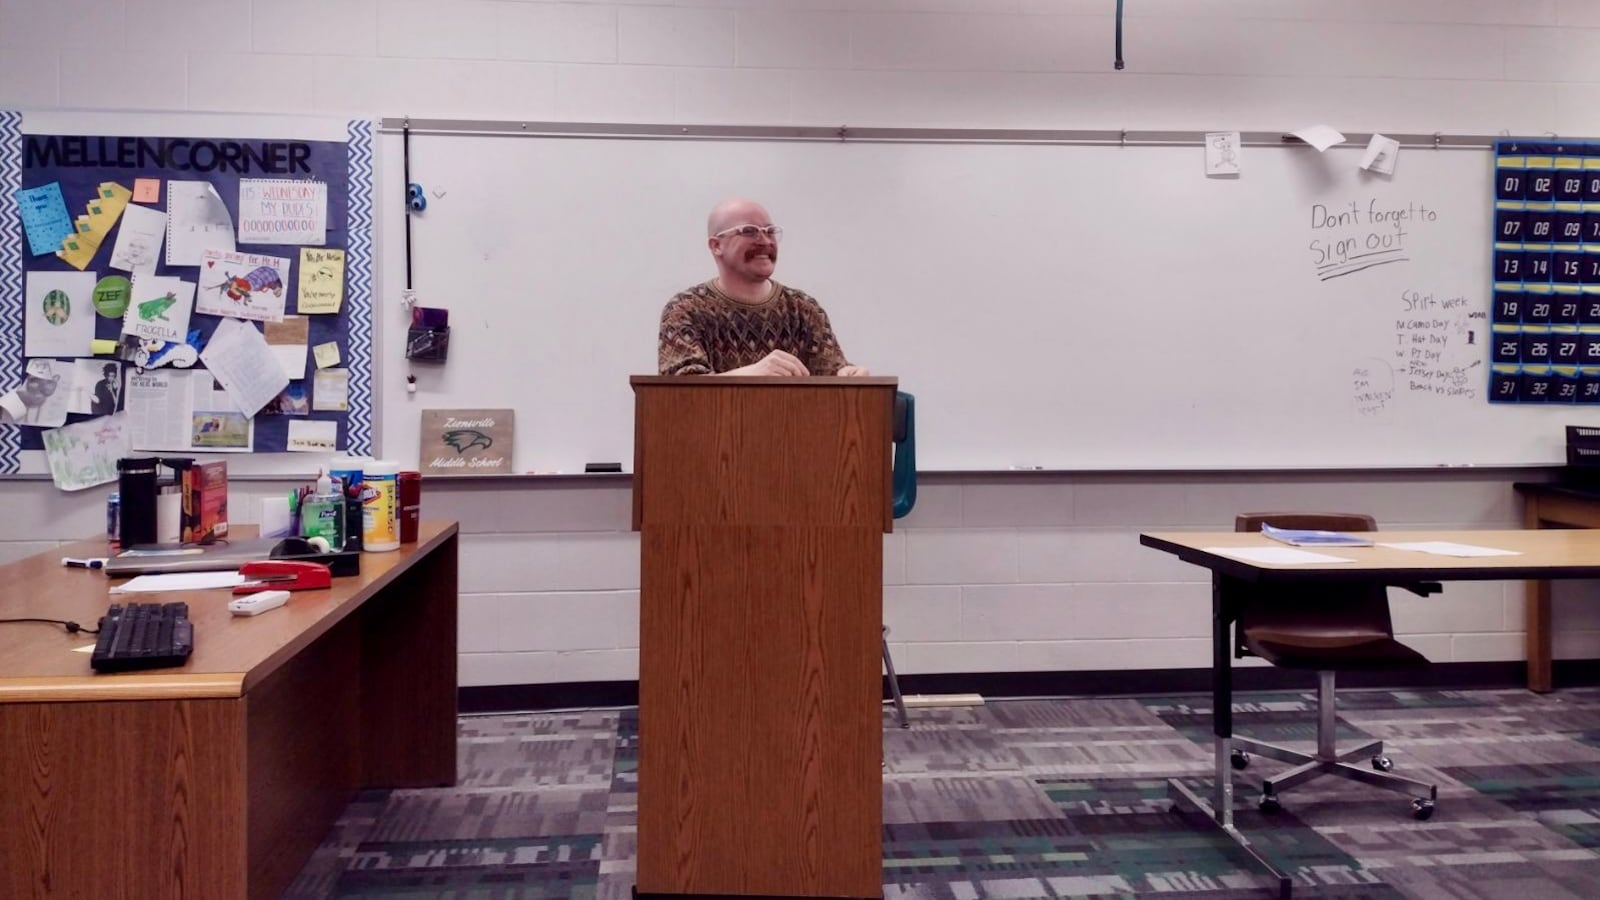 A man stands behind a wooden podium in a classroom. A white board is behind him.